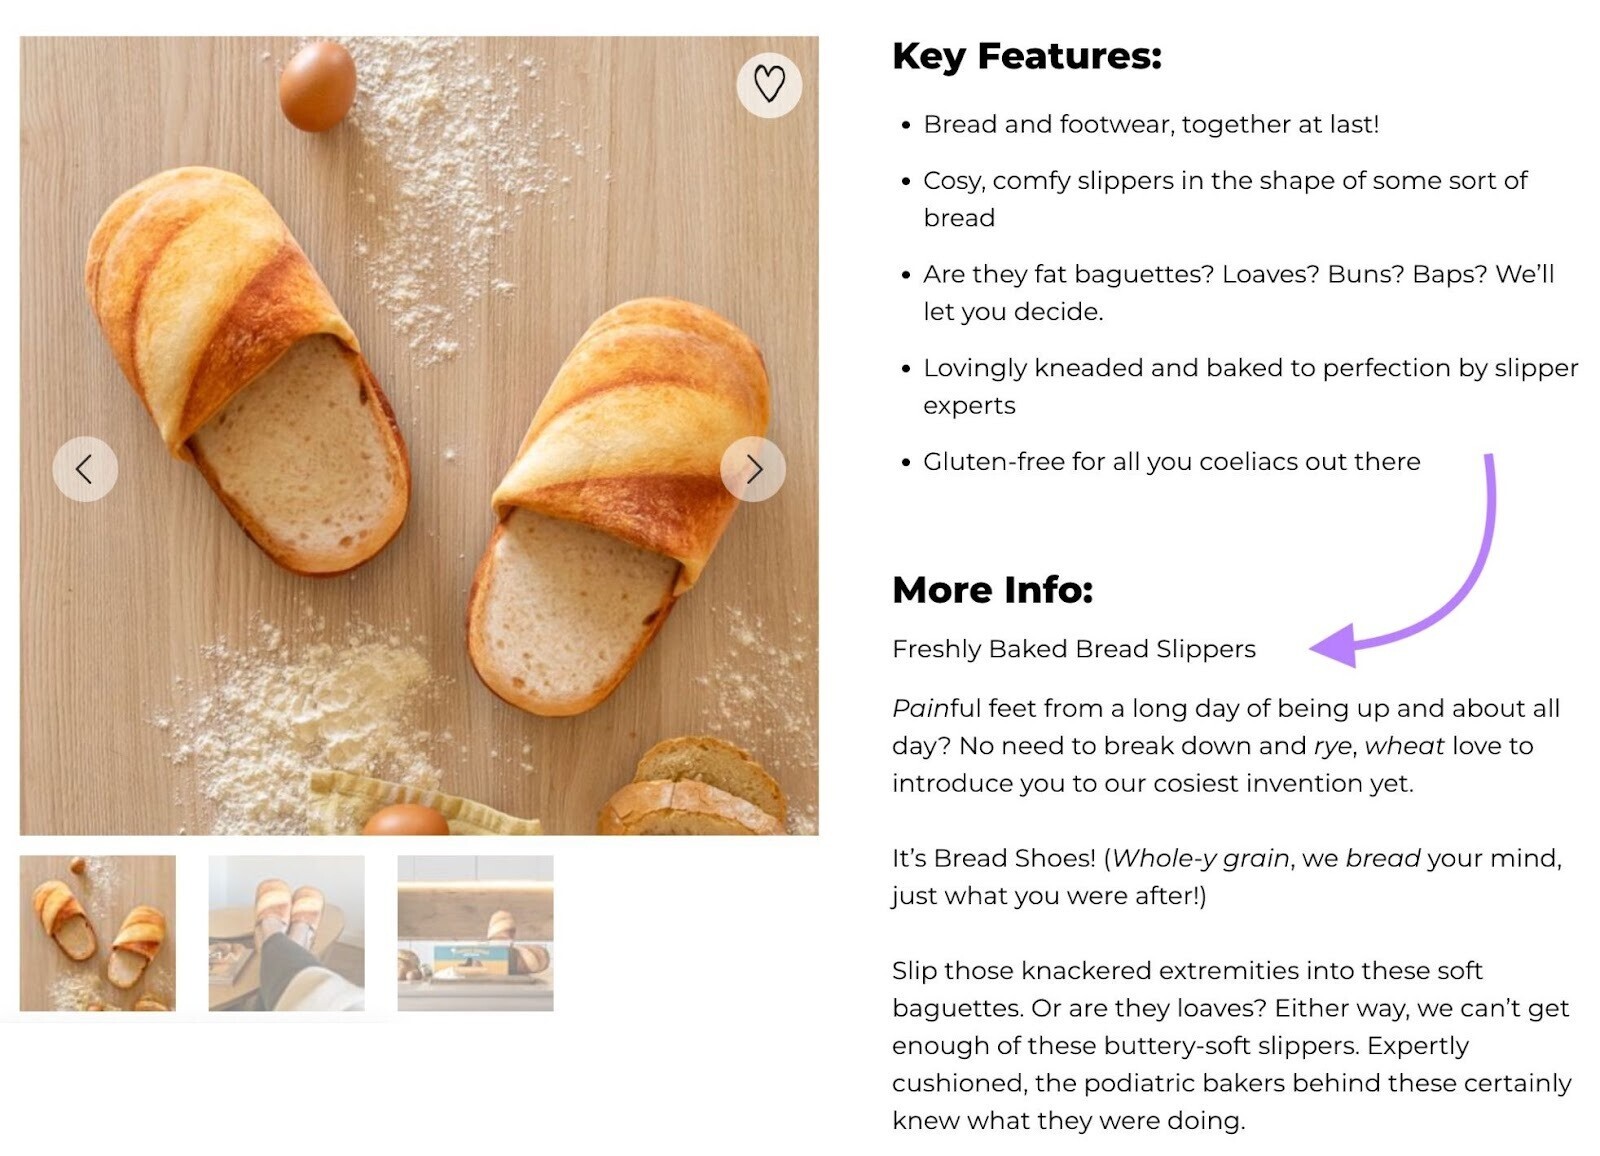 Freshly Baked Bread Slippers," which includes sentences like "Gluten-free for all you coeliacs out there.